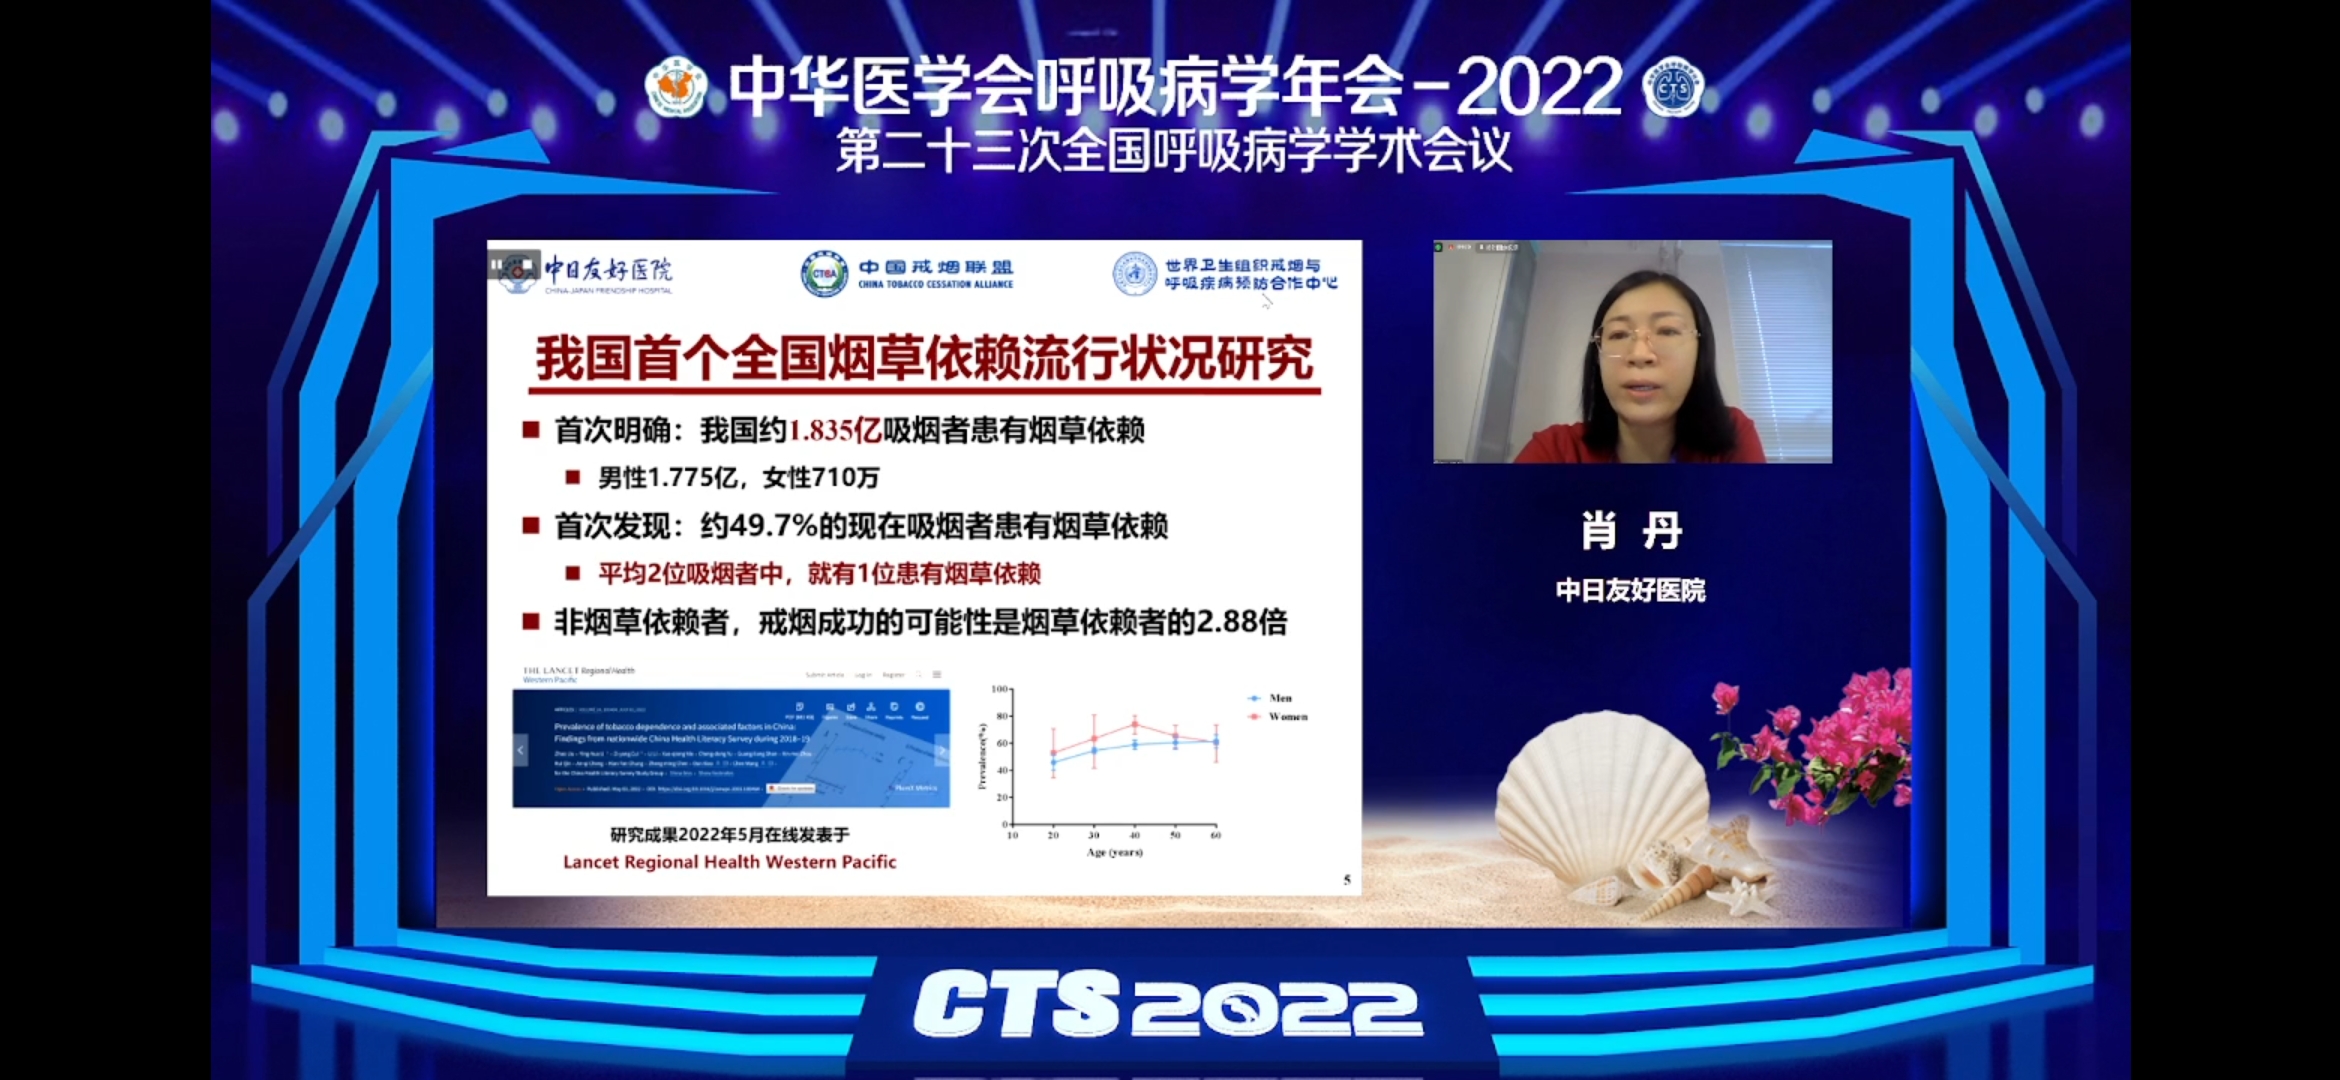 2022<font color="red">中华</font><font color="red">医学会</font><font color="red">呼吸</font>病学年会——肖丹教授：烟草病学2022年度进展